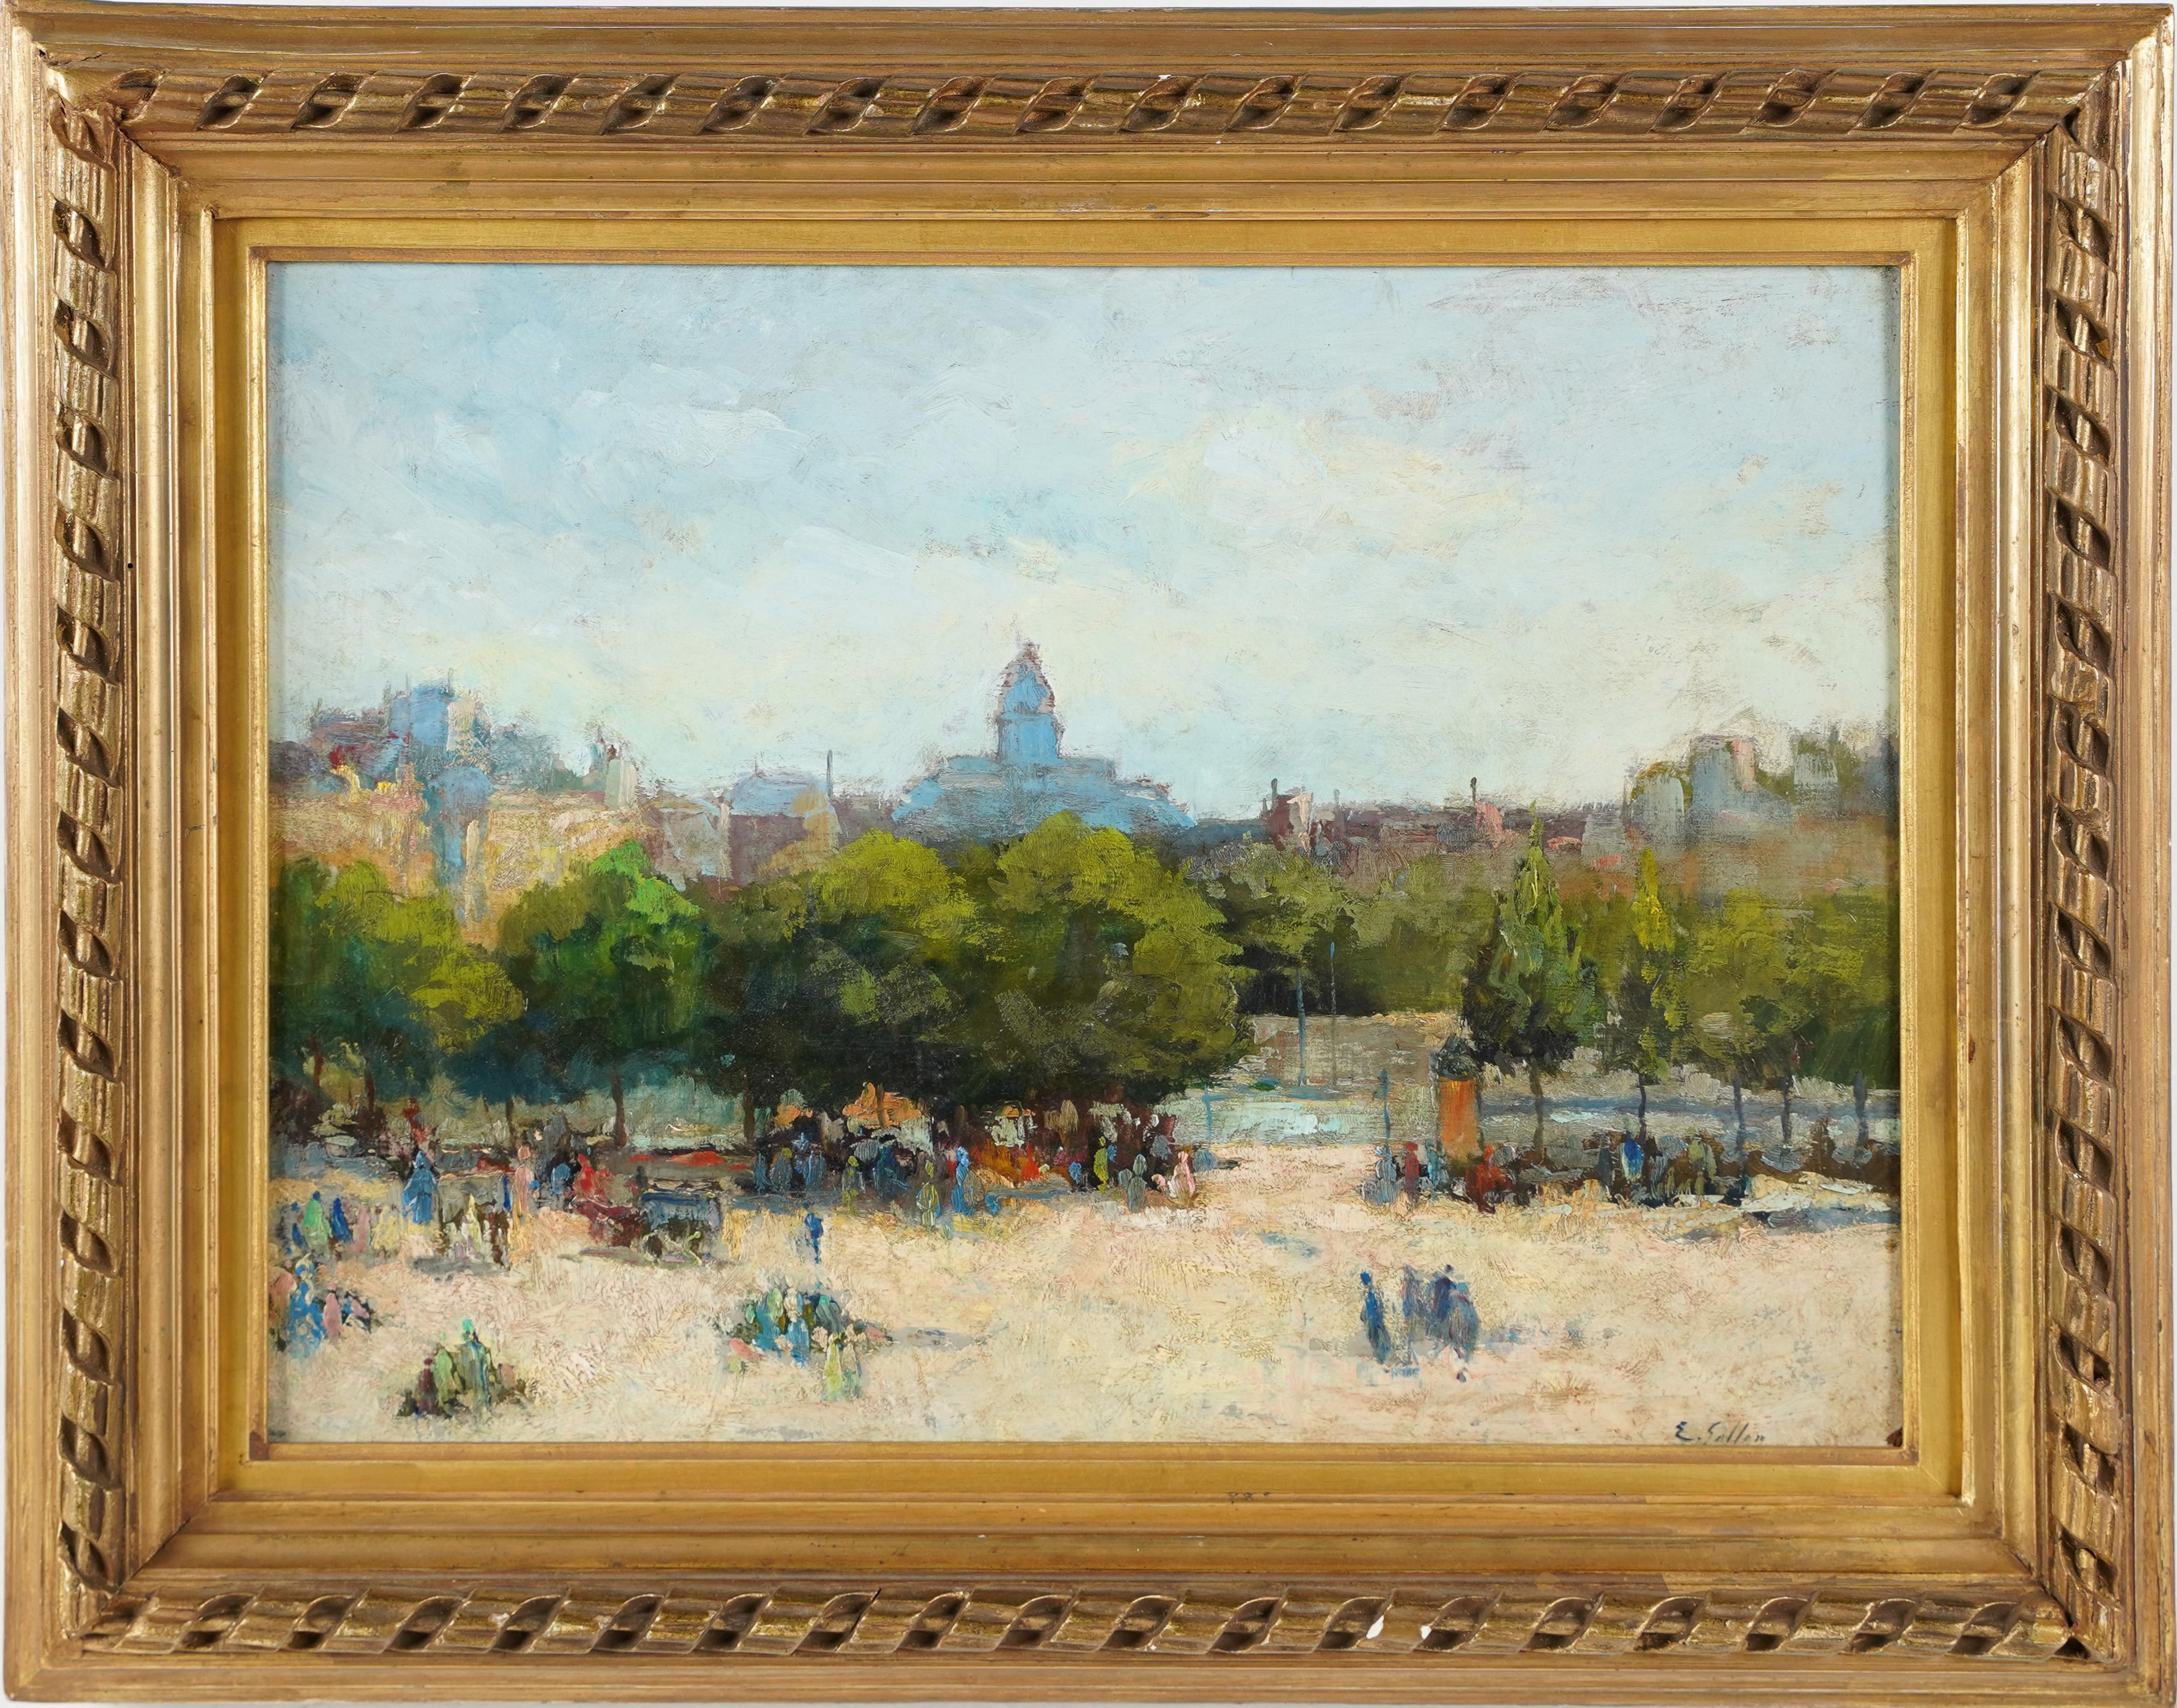  Antique French Impressionist Paris Park Signed Landscape Framed Oil Painting - Brown Landscape Painting by Unknown